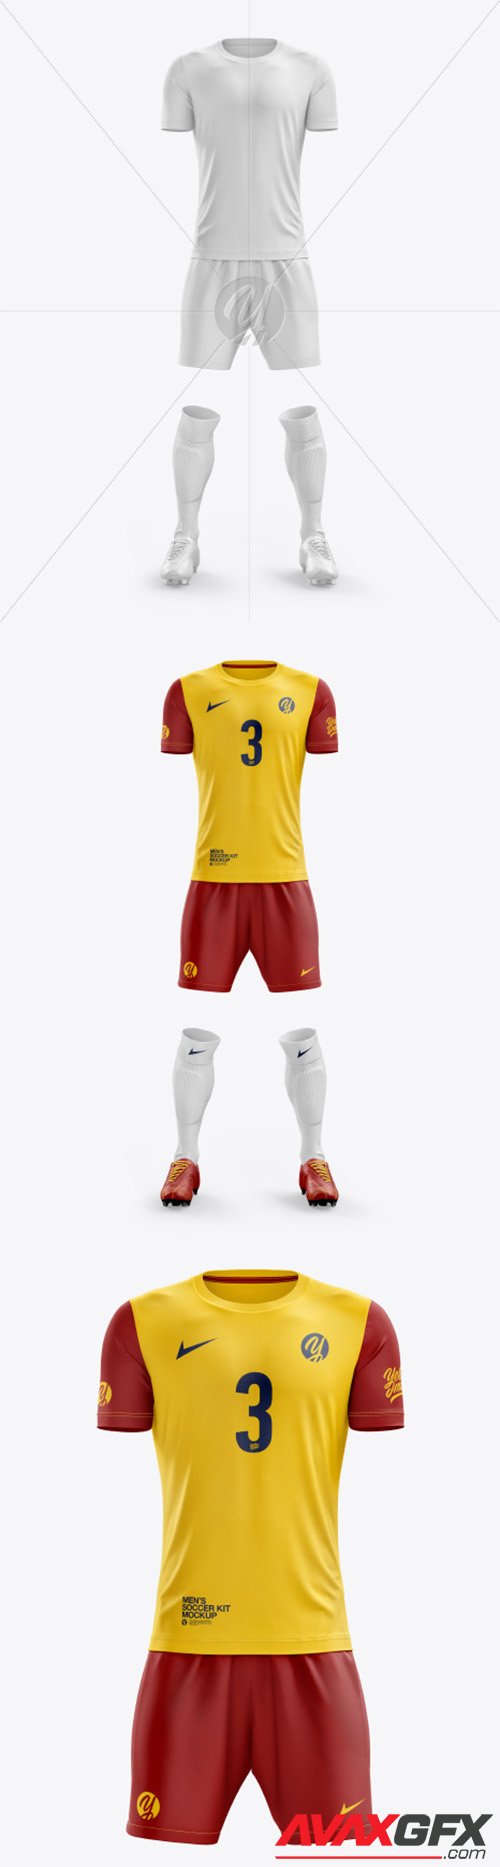 Men’s Full Soccer Kit with Crew Neck Jersey mockup (Front View) 55756